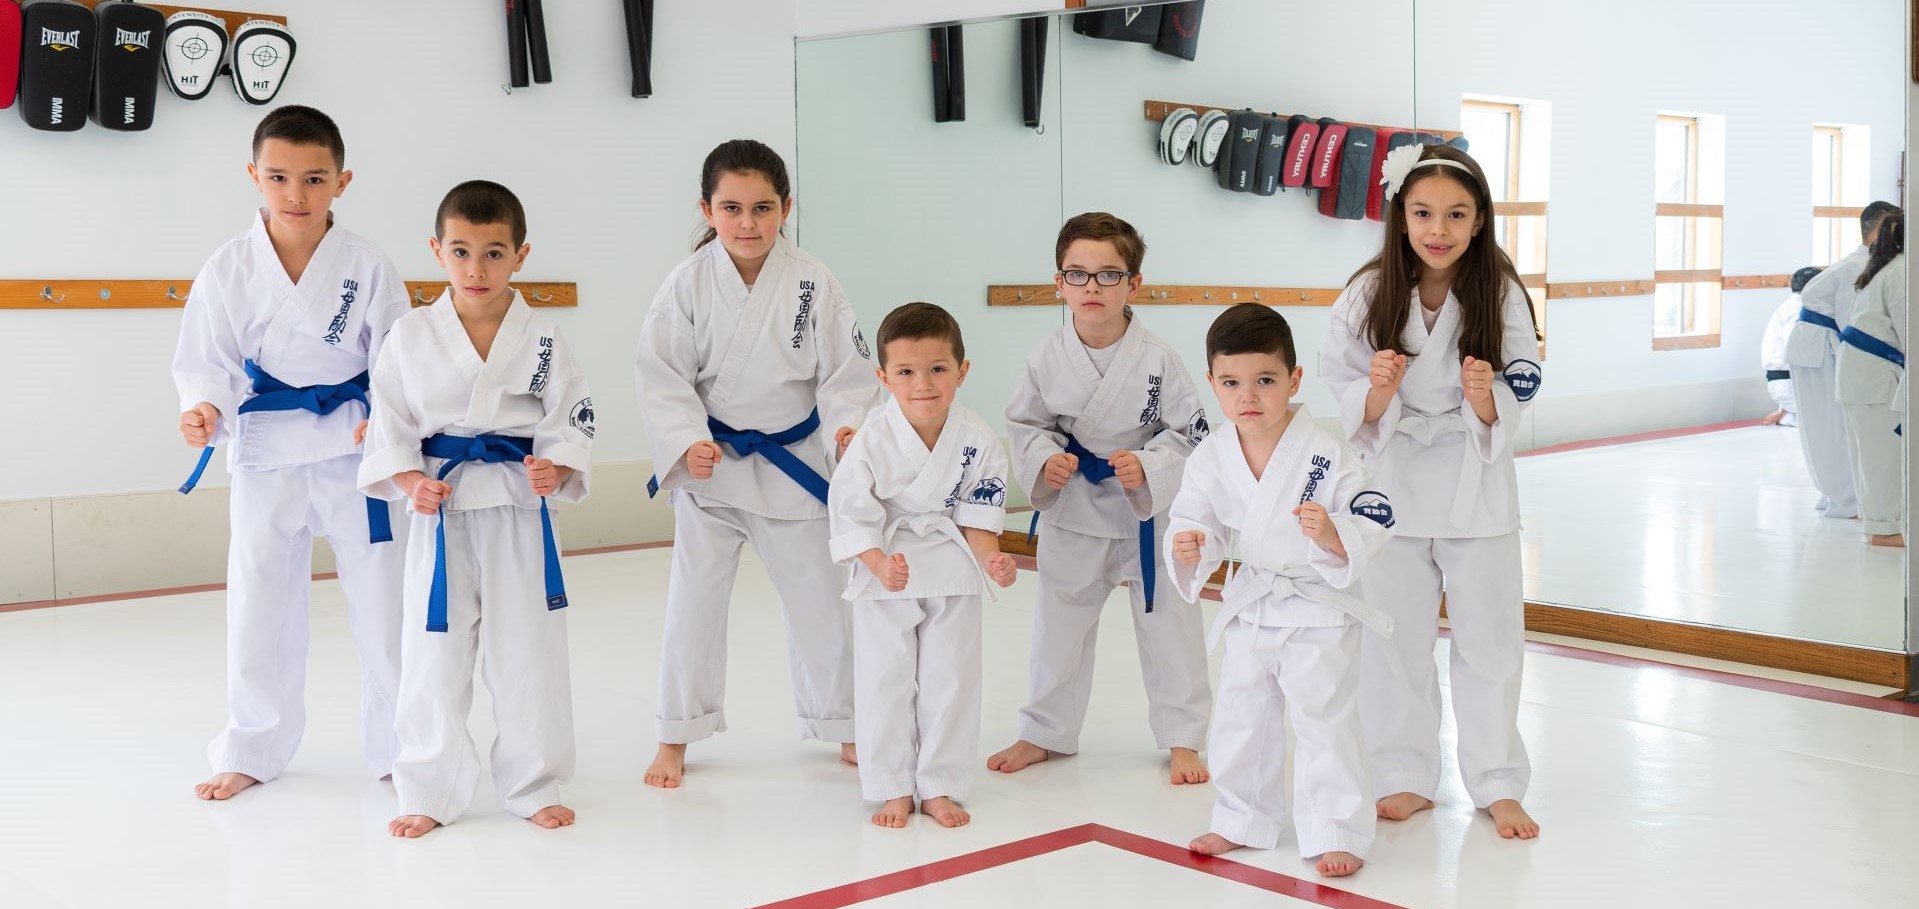 Kanreikai Karate of Connecticut - Karate Martial Arts - Inside The Karate School With Students